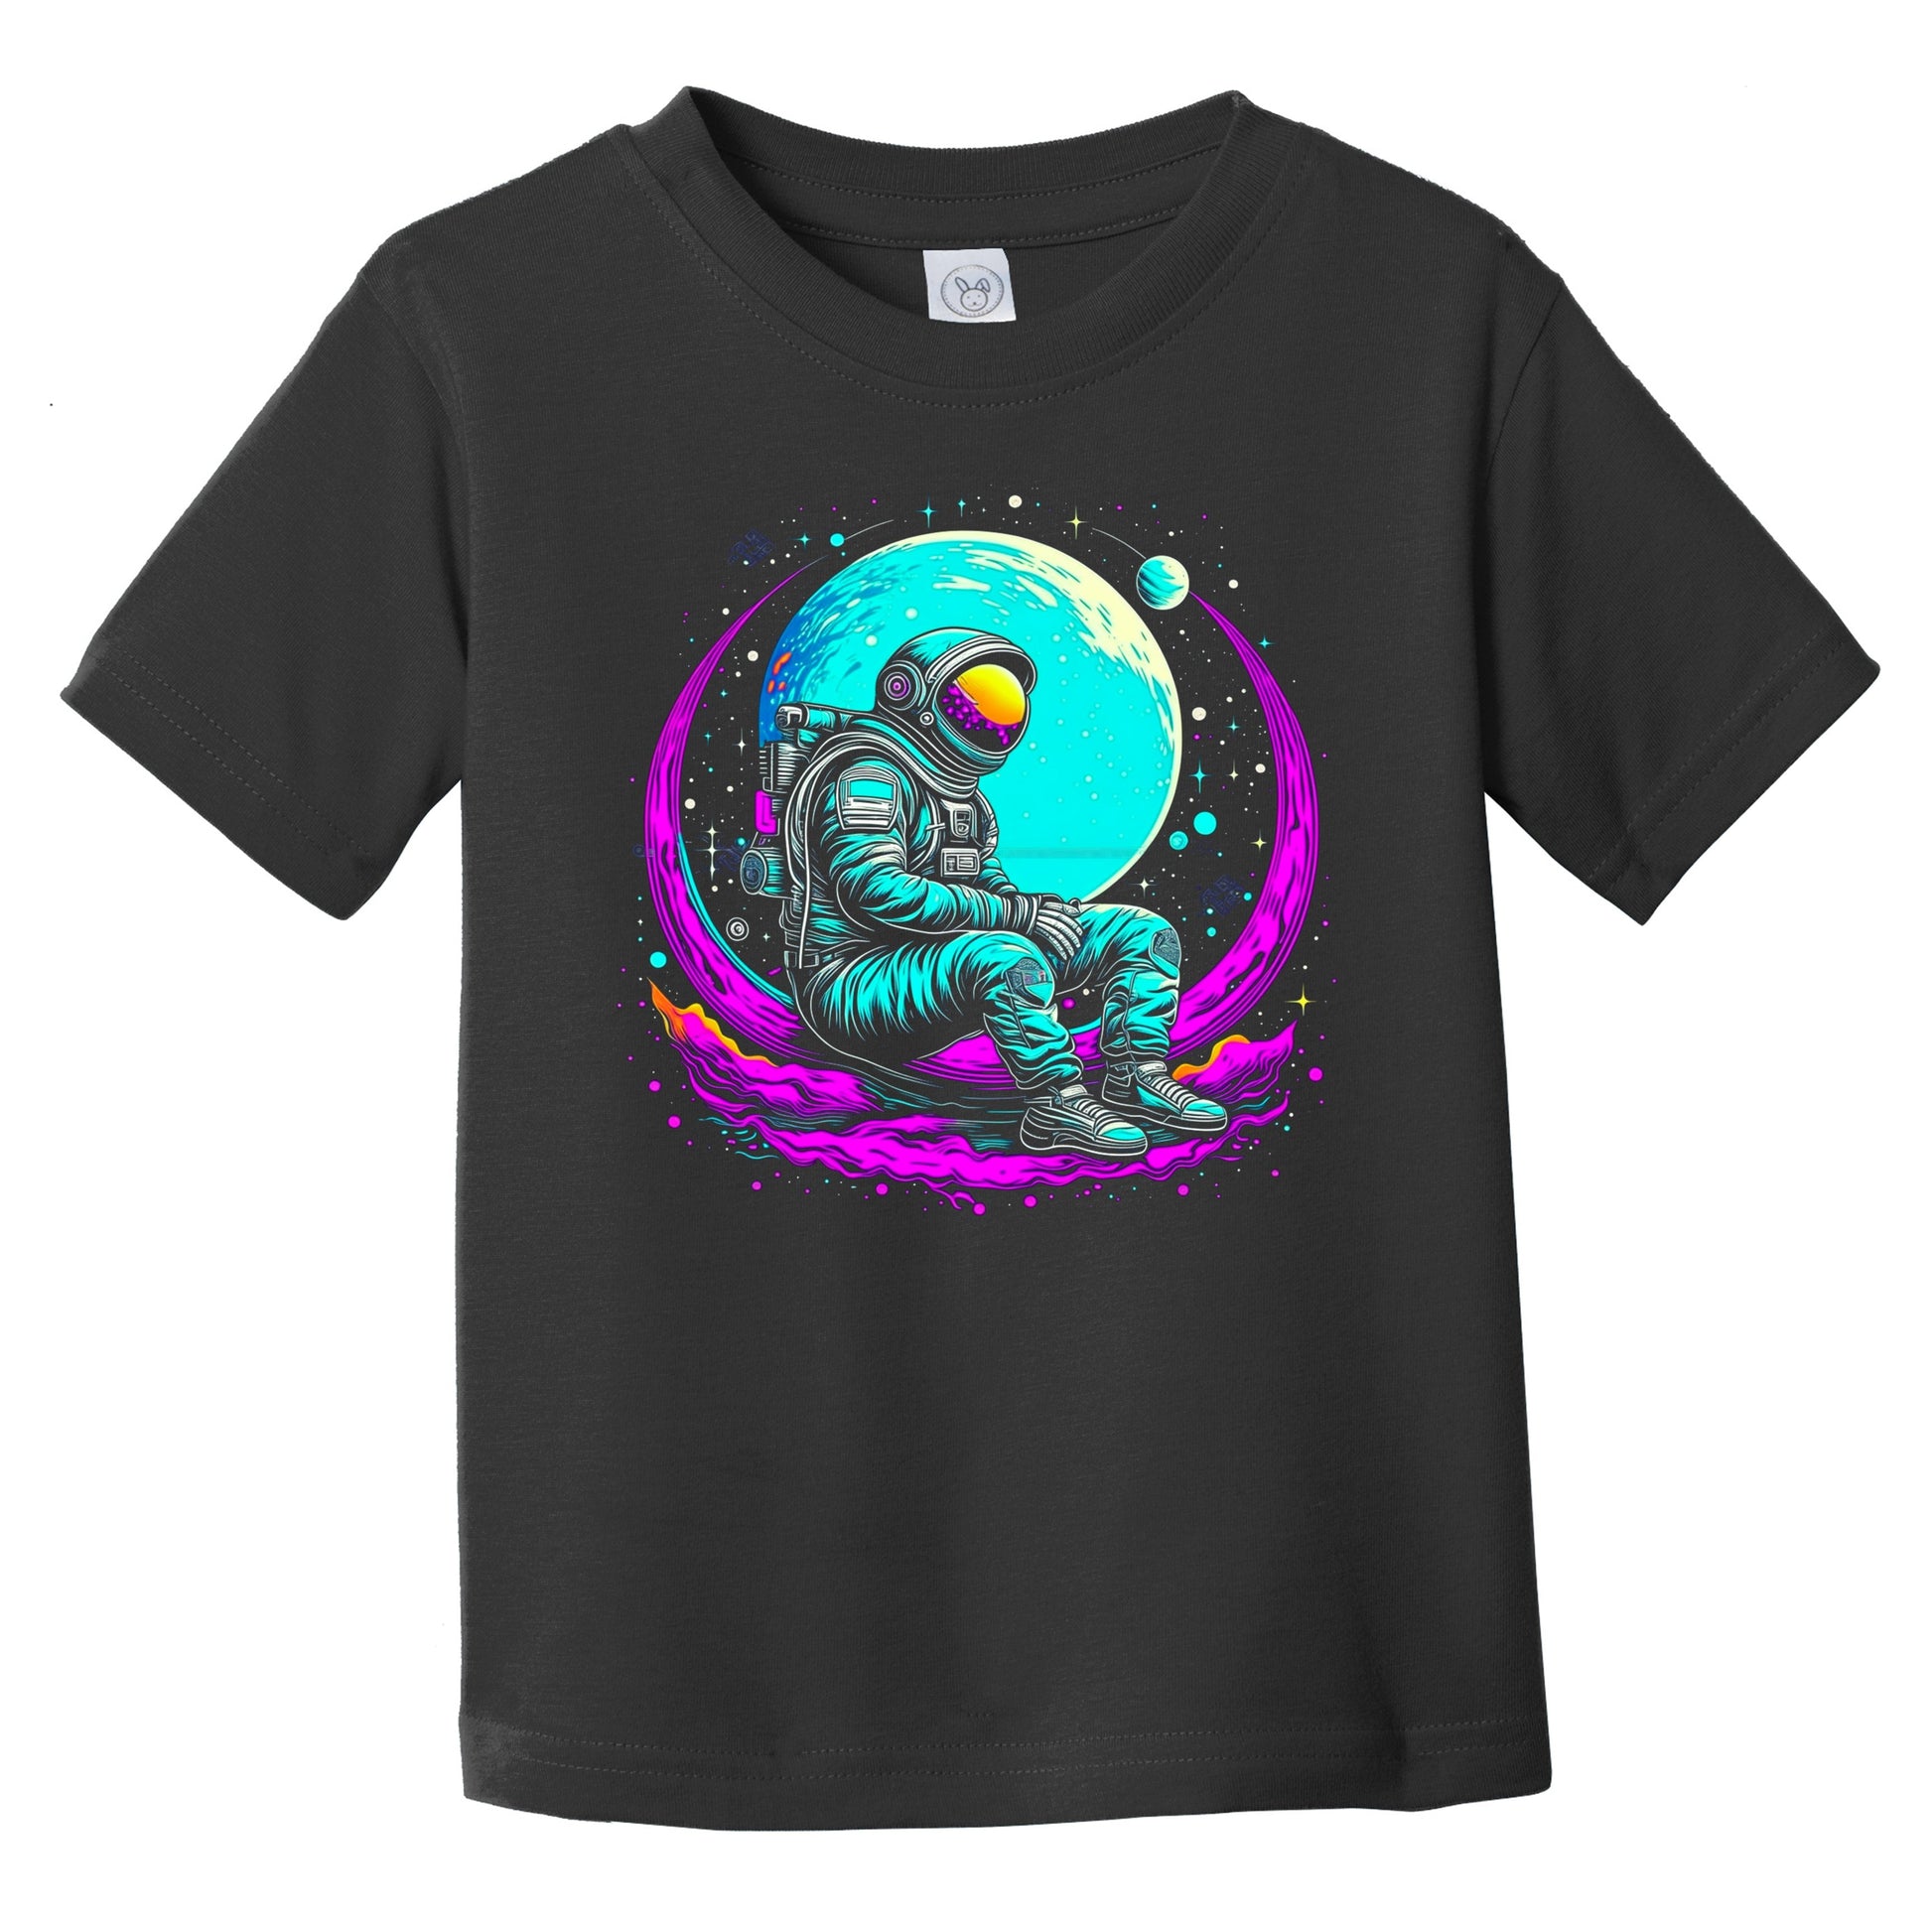 Colorful Bright Astronaut Vibrant Psychedelic Spaceman Art Infant Toddler T-Shirt